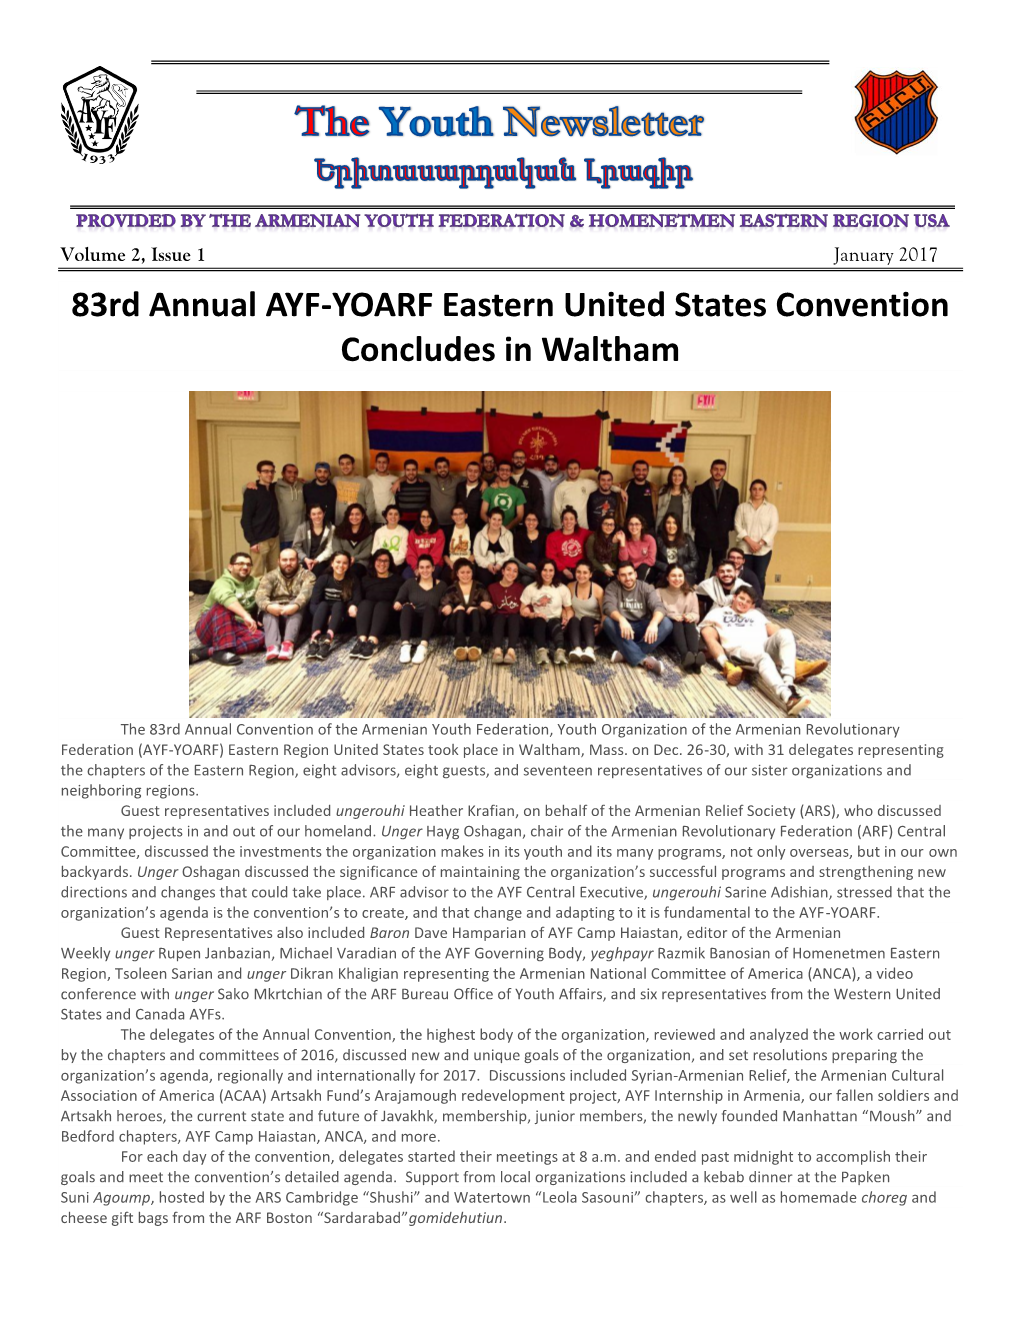 83Rd Annual AYF-YOARF Eastern United States Convention Concludes in Waltham